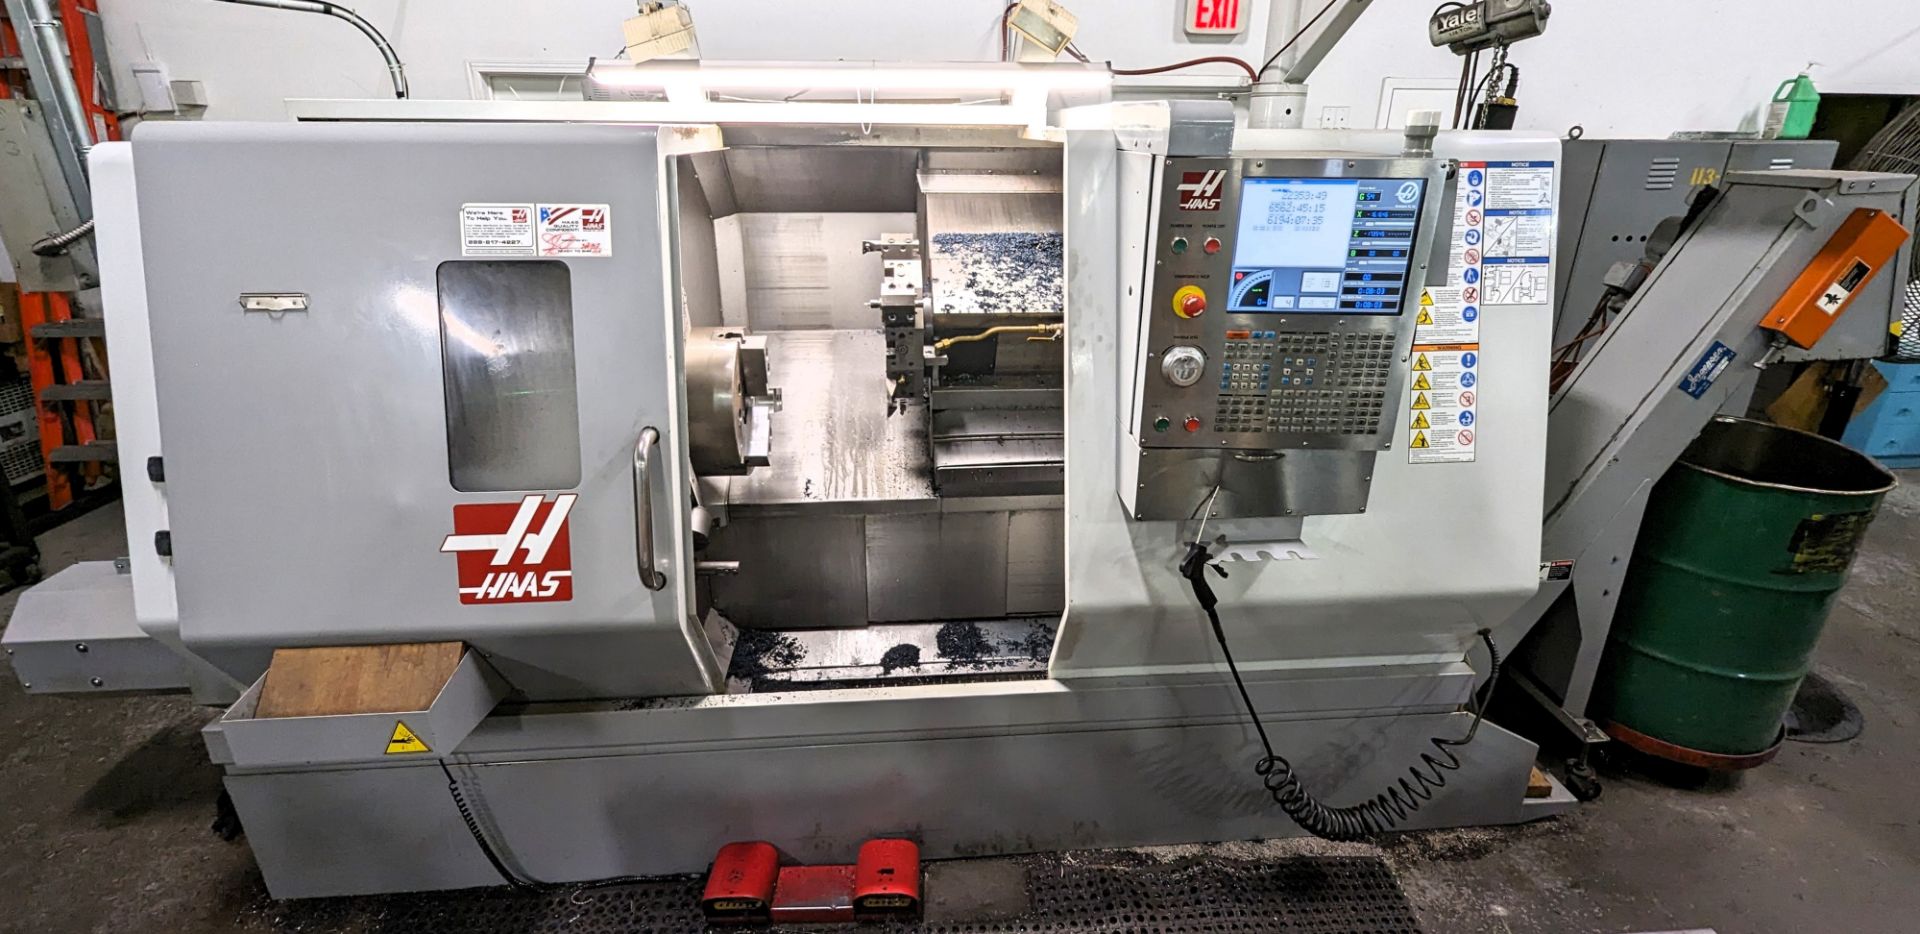 2008 HAAS SL-30TB CNC TURNING CENTER, CNC CONTROL, 15” CHUCK, BIG BORE, TAILSTOCK, TOOL SETTER, CHIP - Image 2 of 13